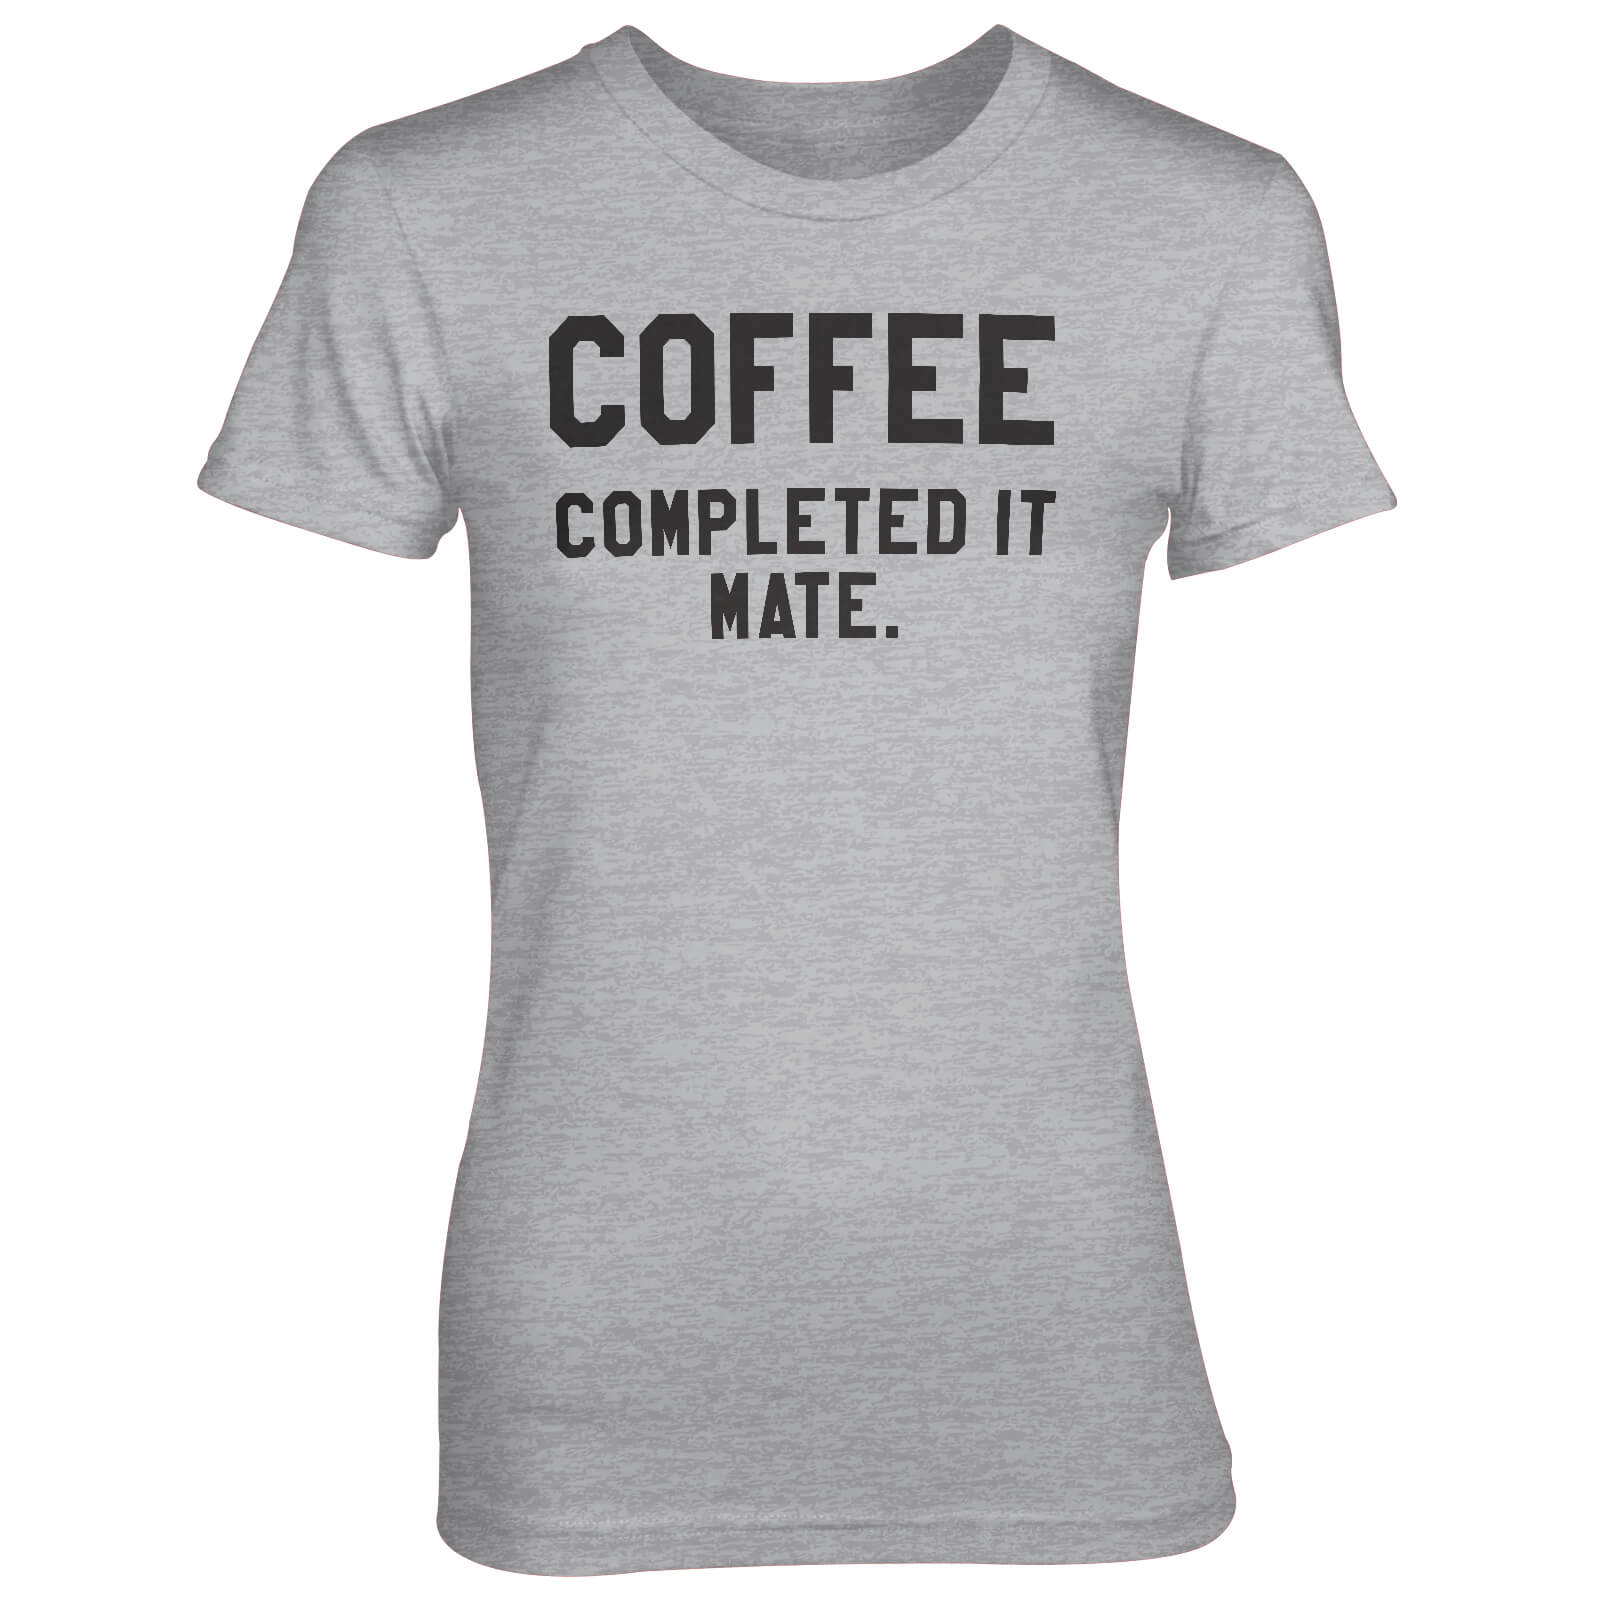 Coffee - Completed It Mate Women's Grey T-Shirt - S - Grey